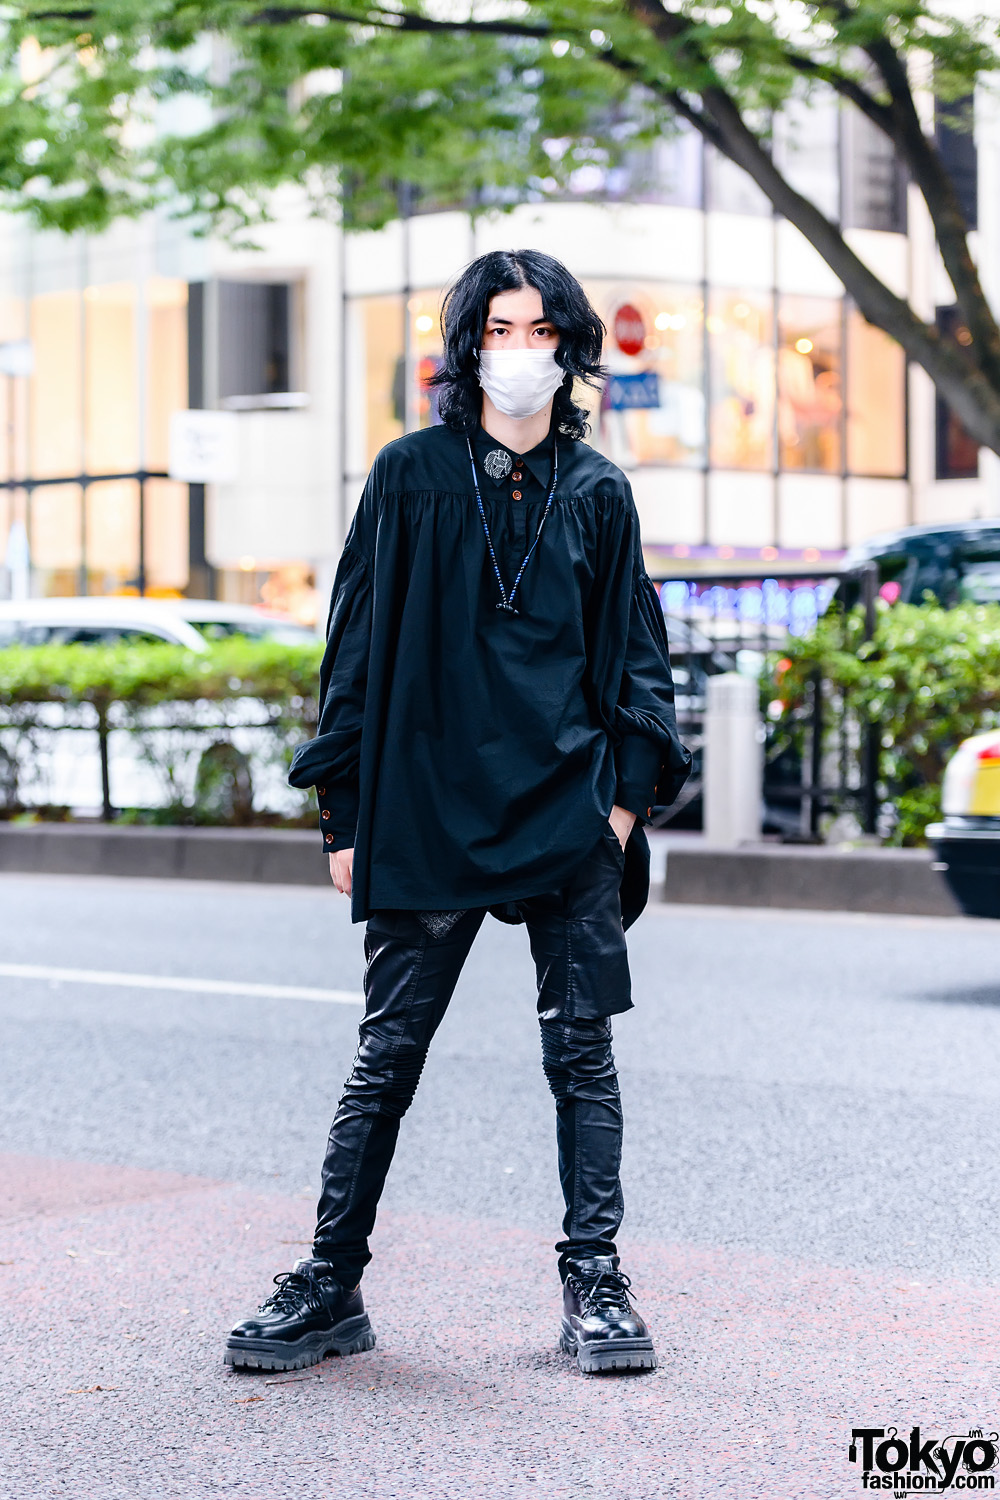 Japanese Stylist's All Black Street Style w/ Face Mask, Sacai x Beats Earphones, Christopher Nemeth Smock Top, Rick Owens Memphis Leather Trousers & Eytys Leather Shoes